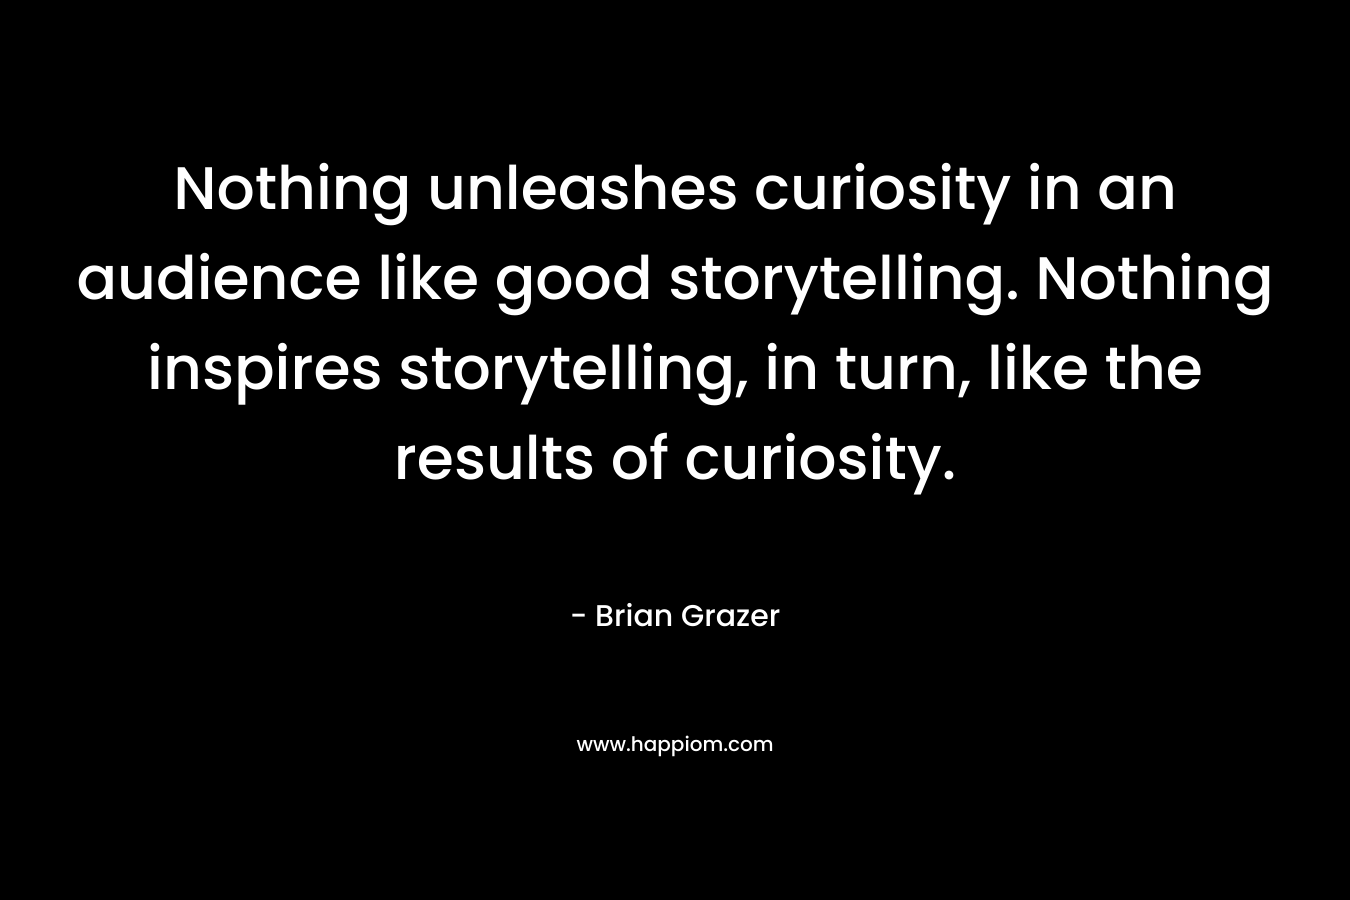 Nothing unleashes curiosity in an audience like good storytelling. Nothing inspires storytelling, in turn, like the results of curiosity.